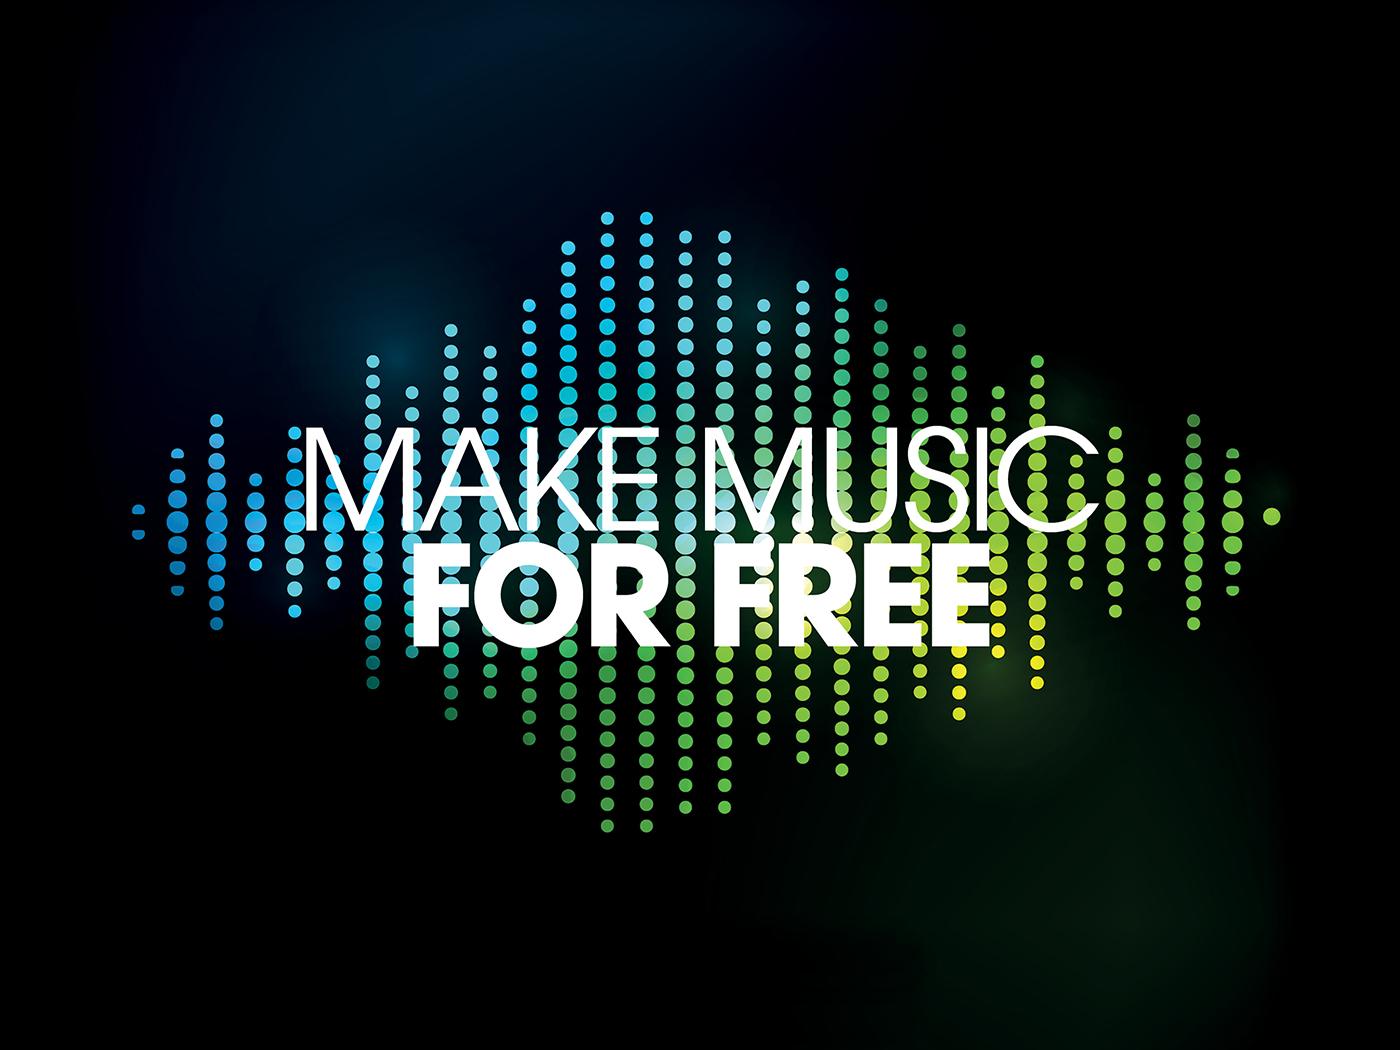 A Guide to Making Music for Free: The Best Free Software